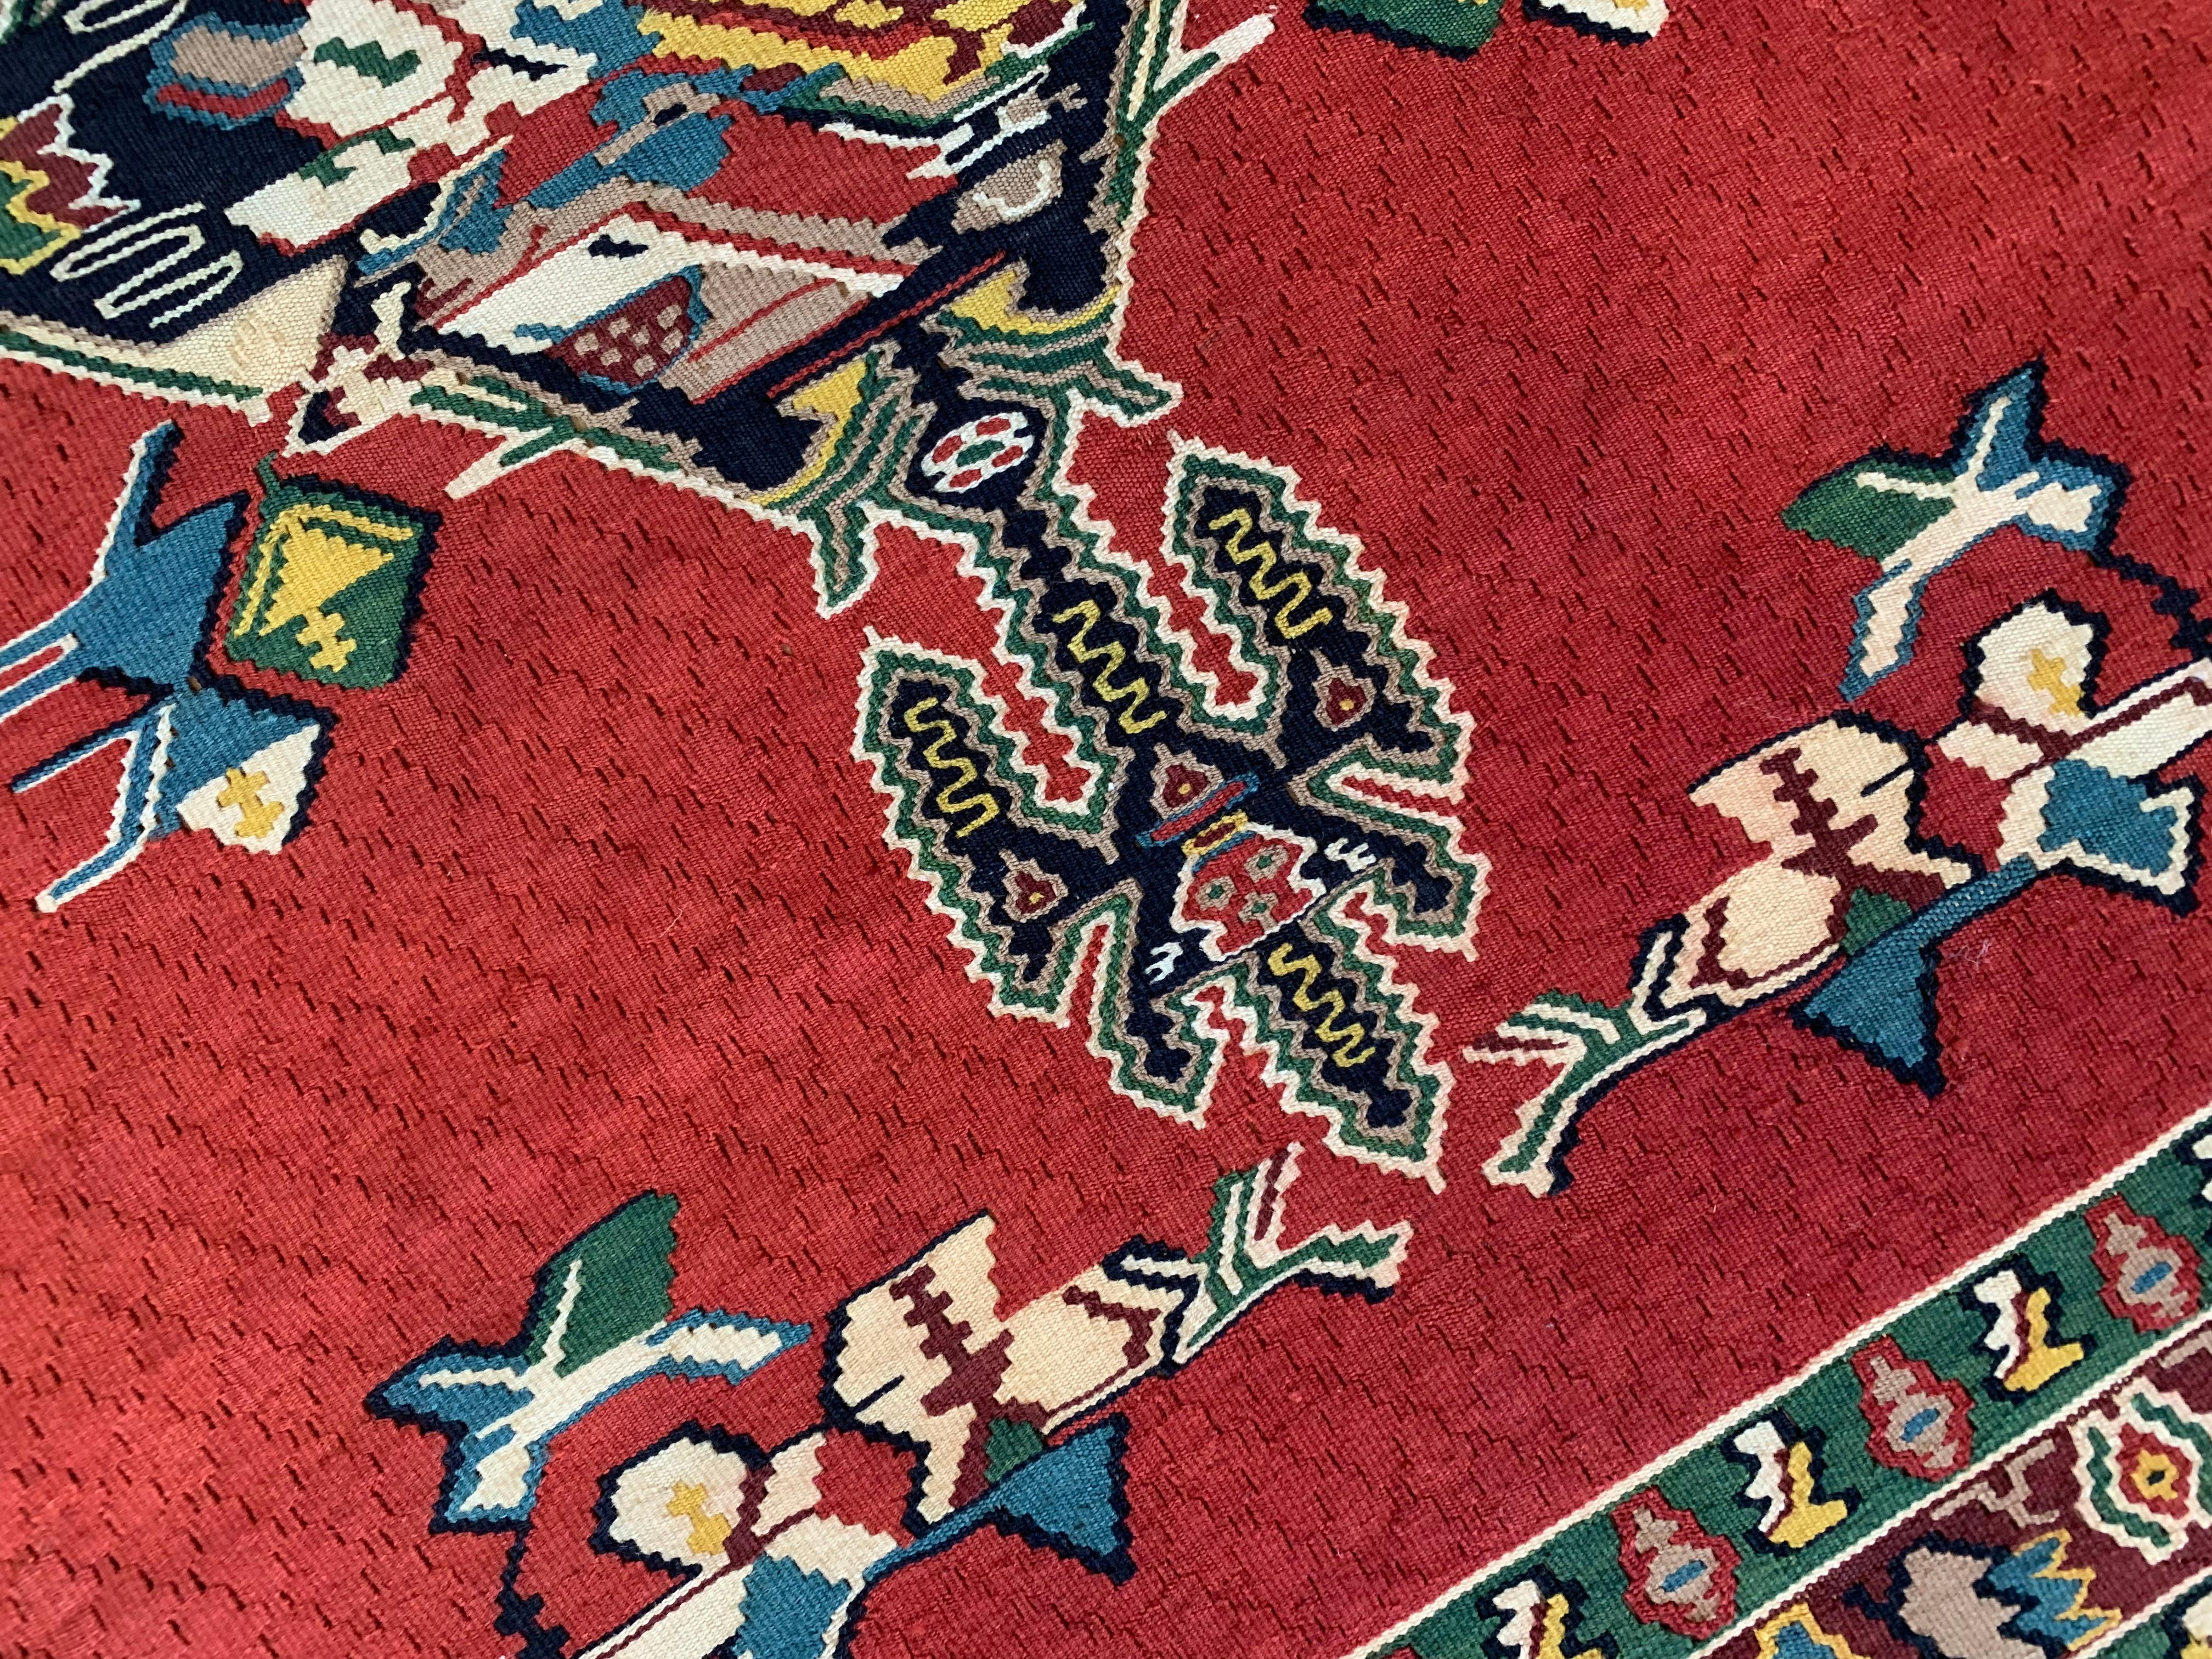 These beautiful Rugs are handmade, flatwoven kilims woven in the early 21st century, circa 2010. It is unused and so is in excellent condition. The design features a bold red background that has been decorated with an intricate decorative geometric